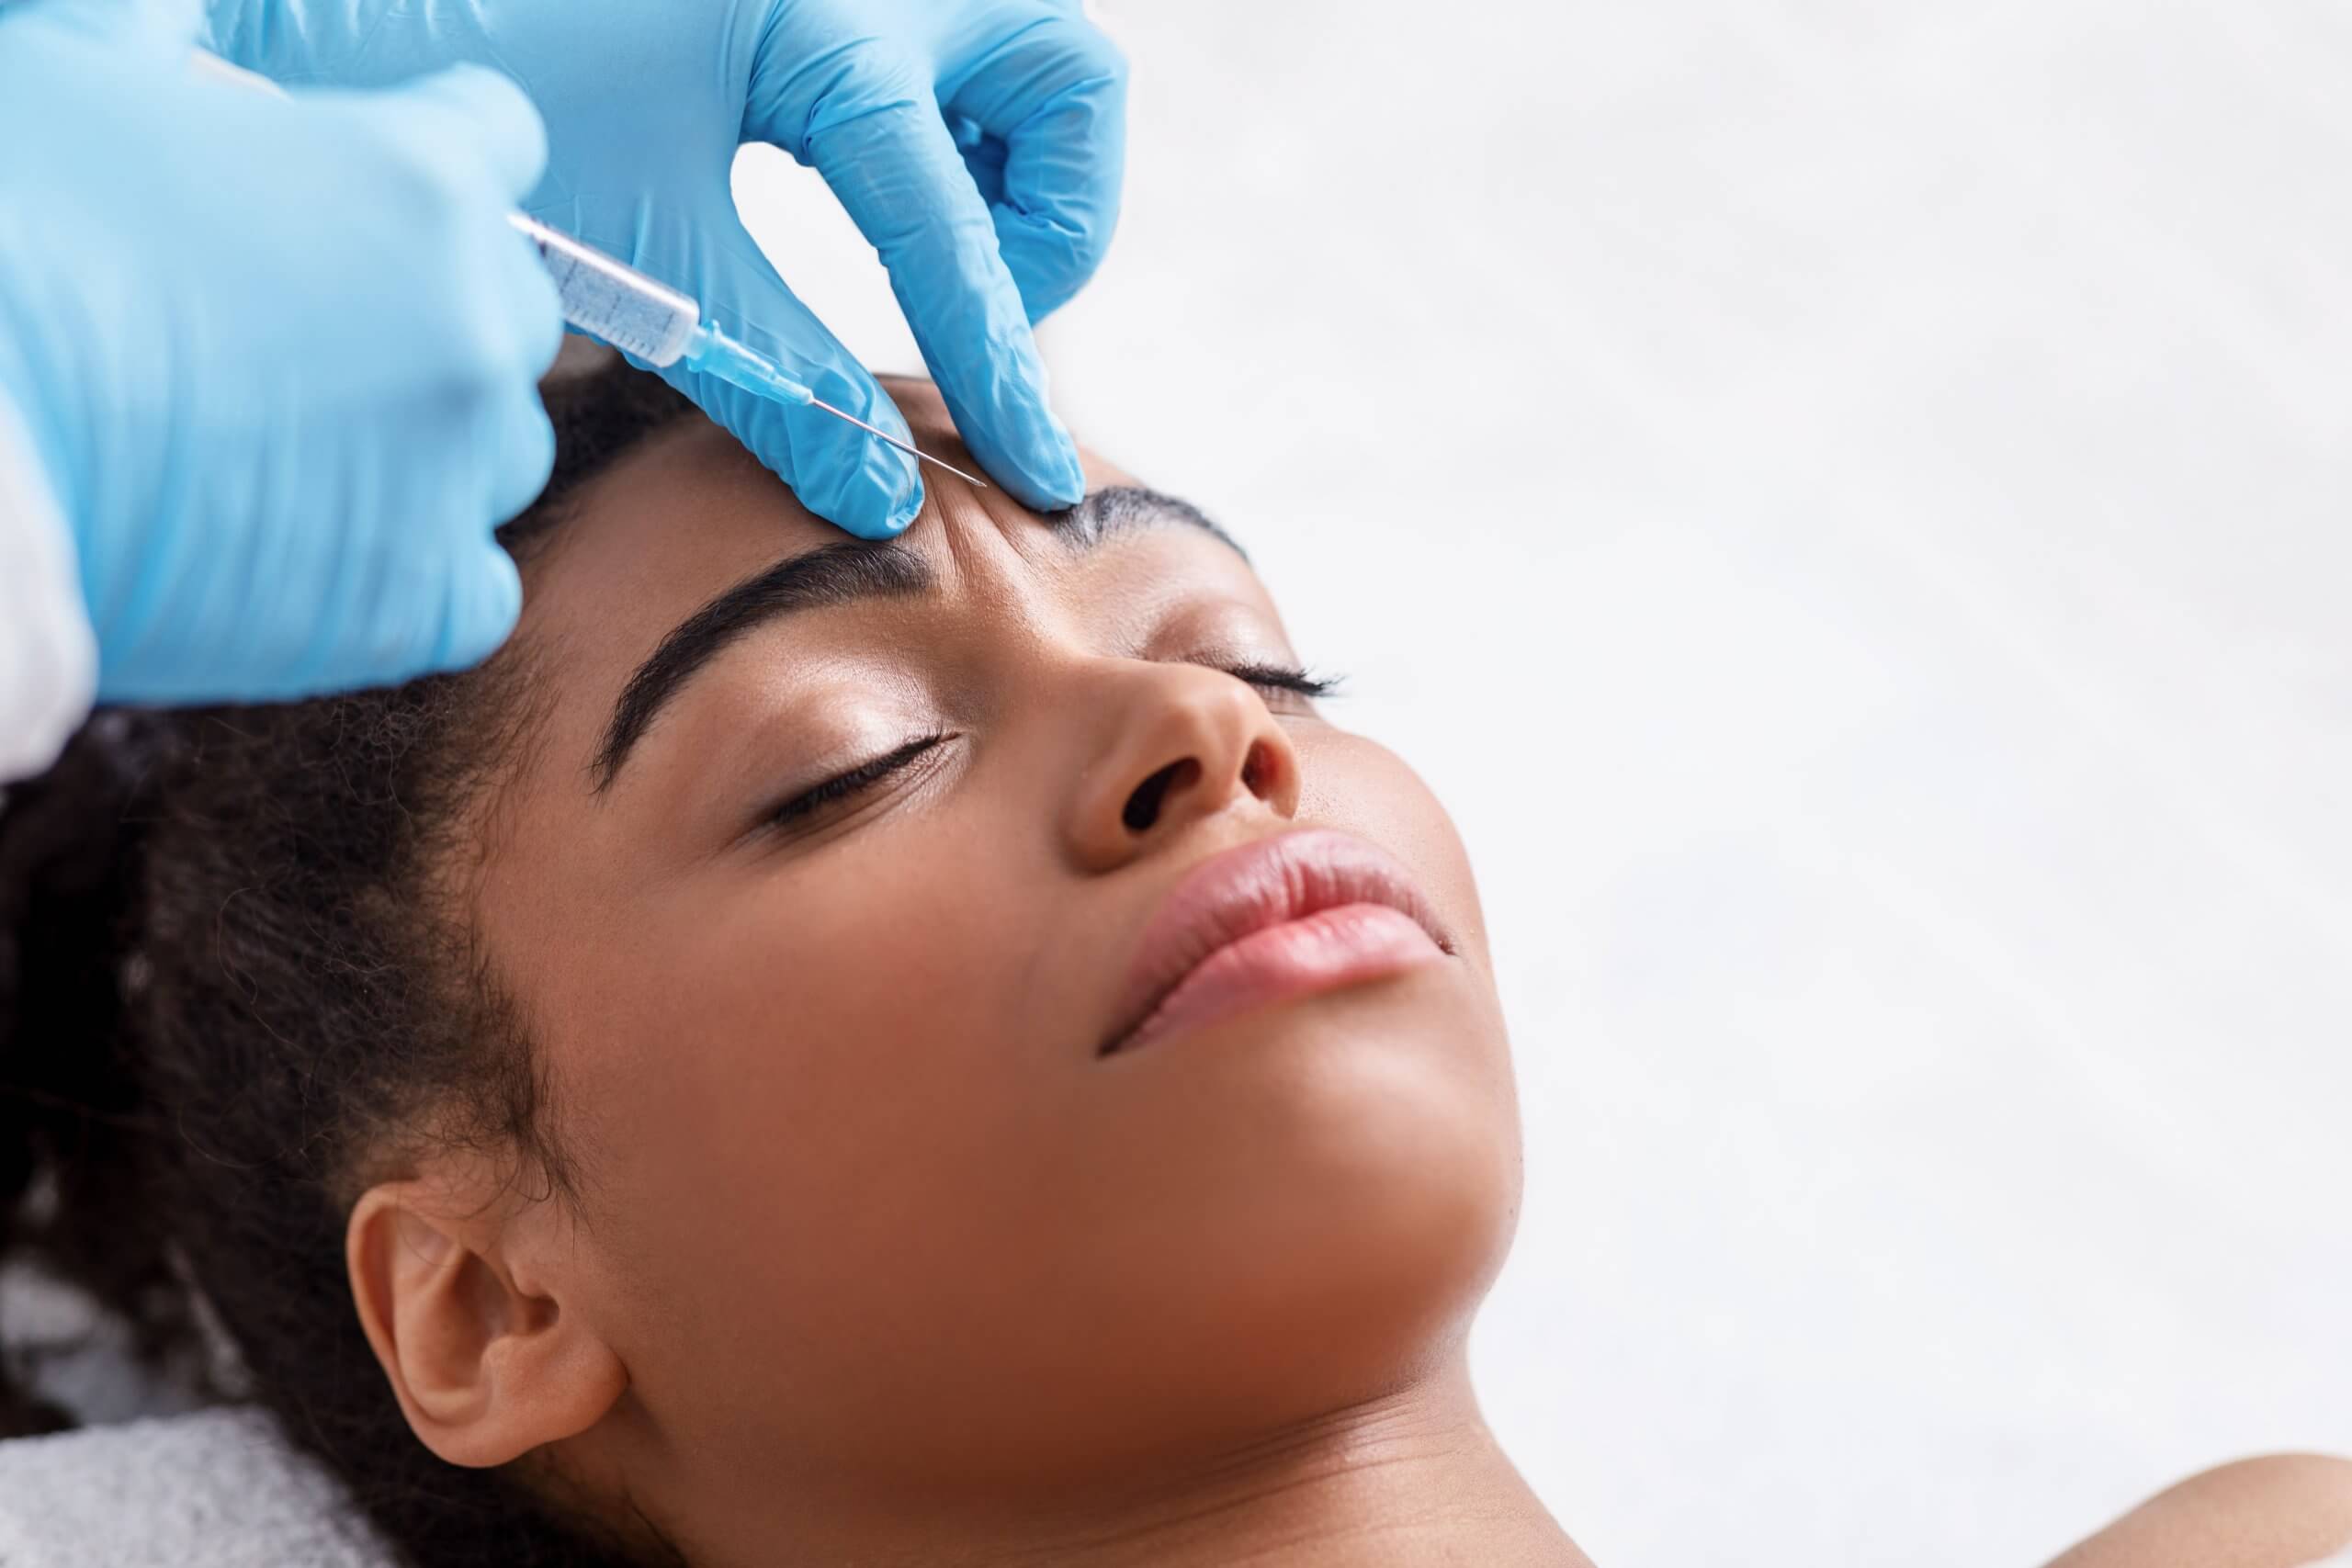 botox and filler training in Nashville allows real-world training on real clients